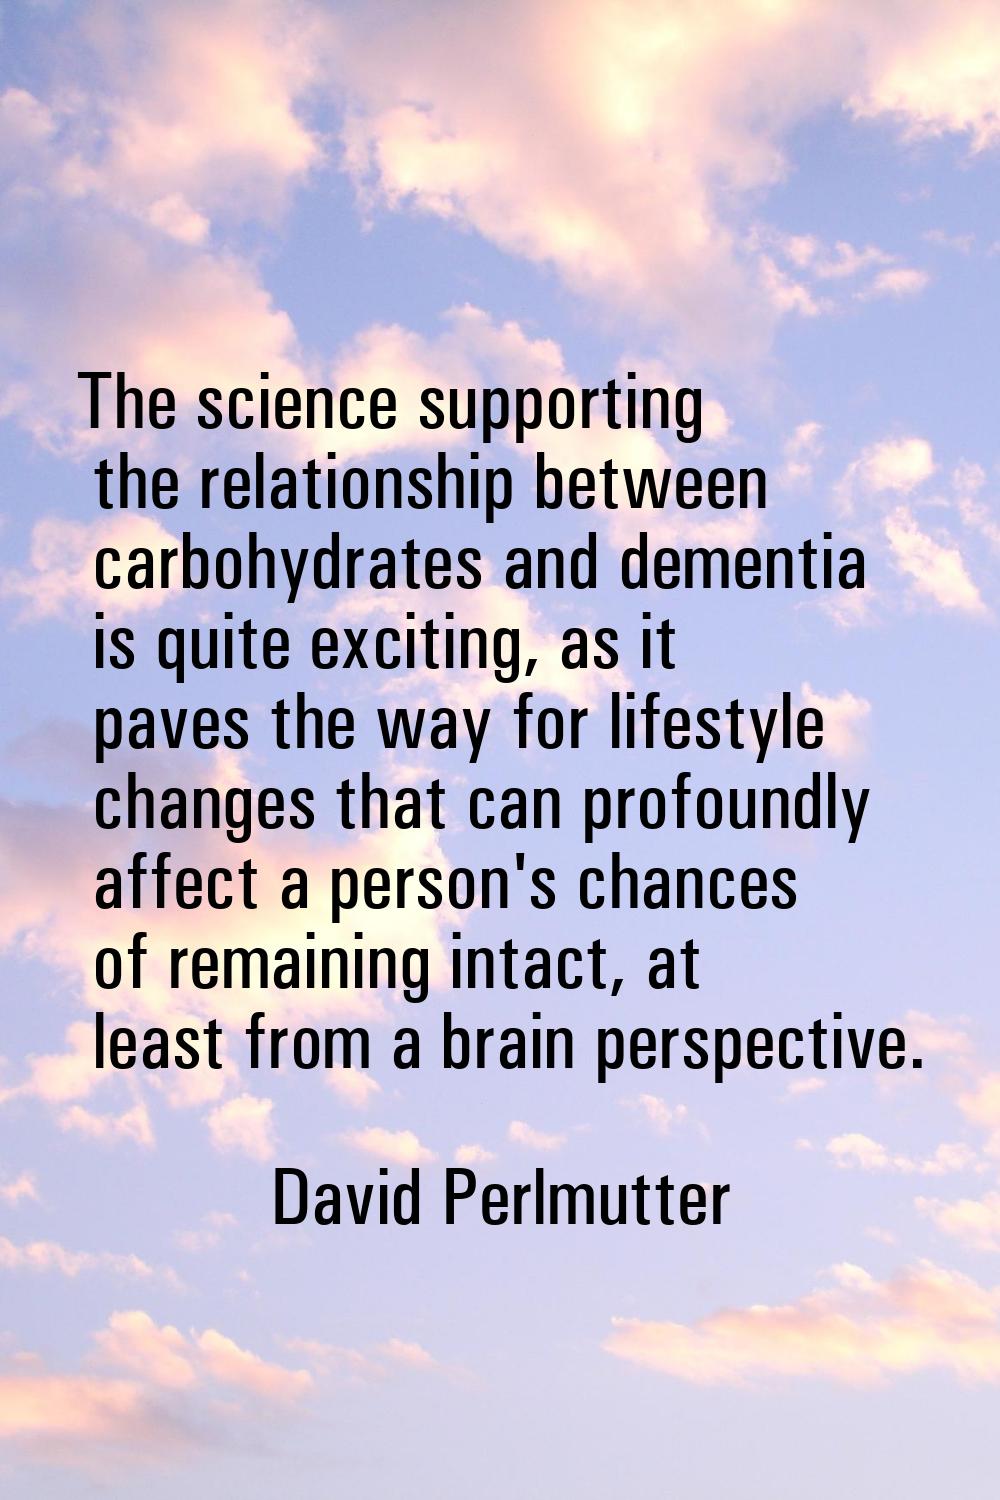 The science supporting the relationship between carbohydrates and dementia is quite exciting, as it